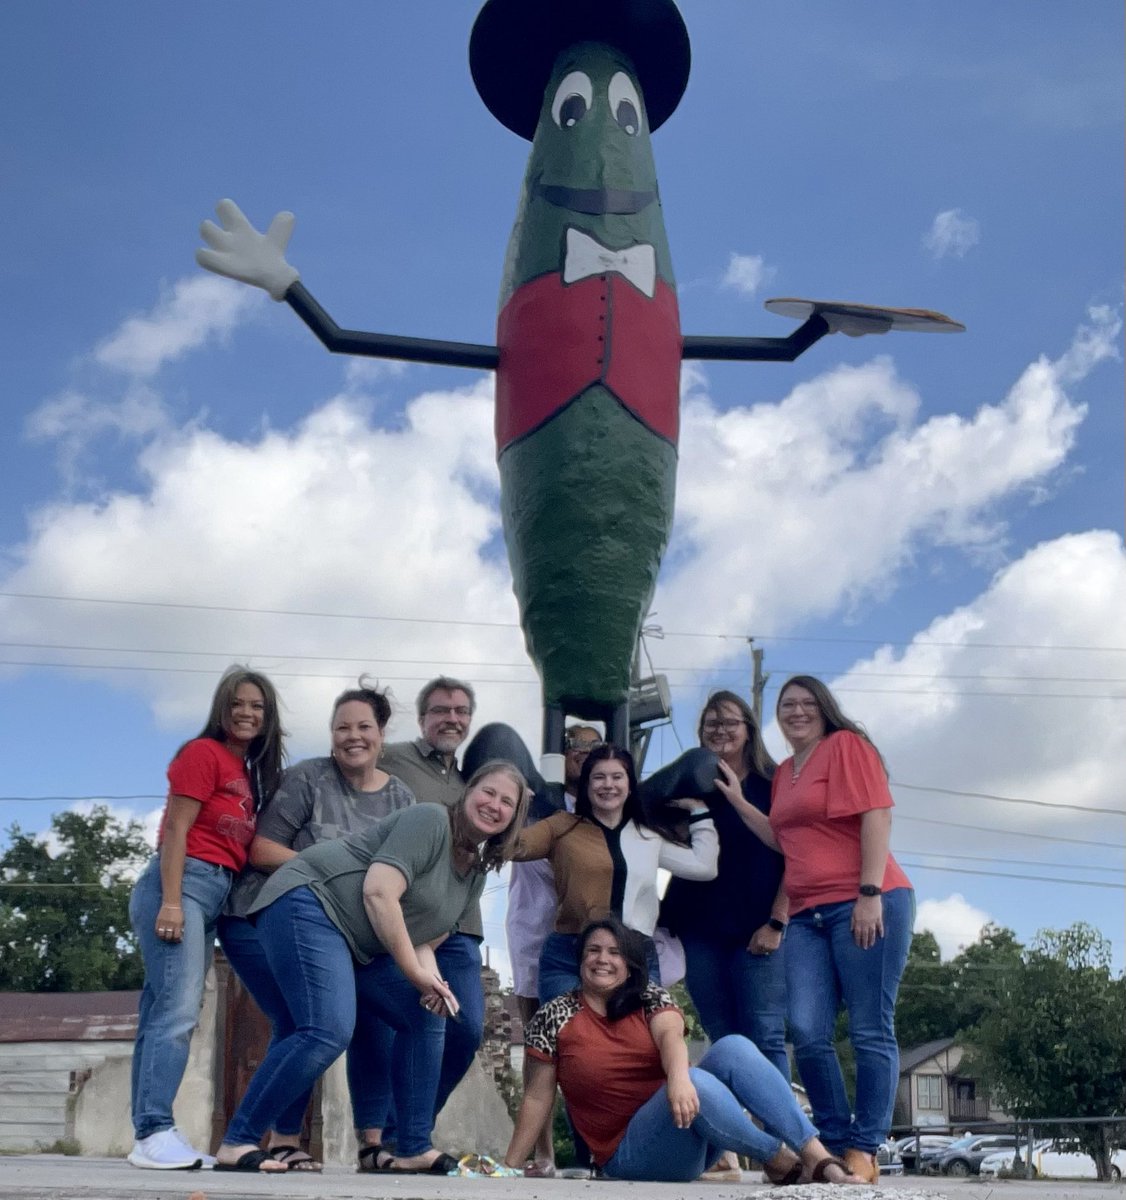 Team Purplicious thinks that @TISDDPES treats us like “a big dill” and we love it! #DPEScougarprowl #hometownteam